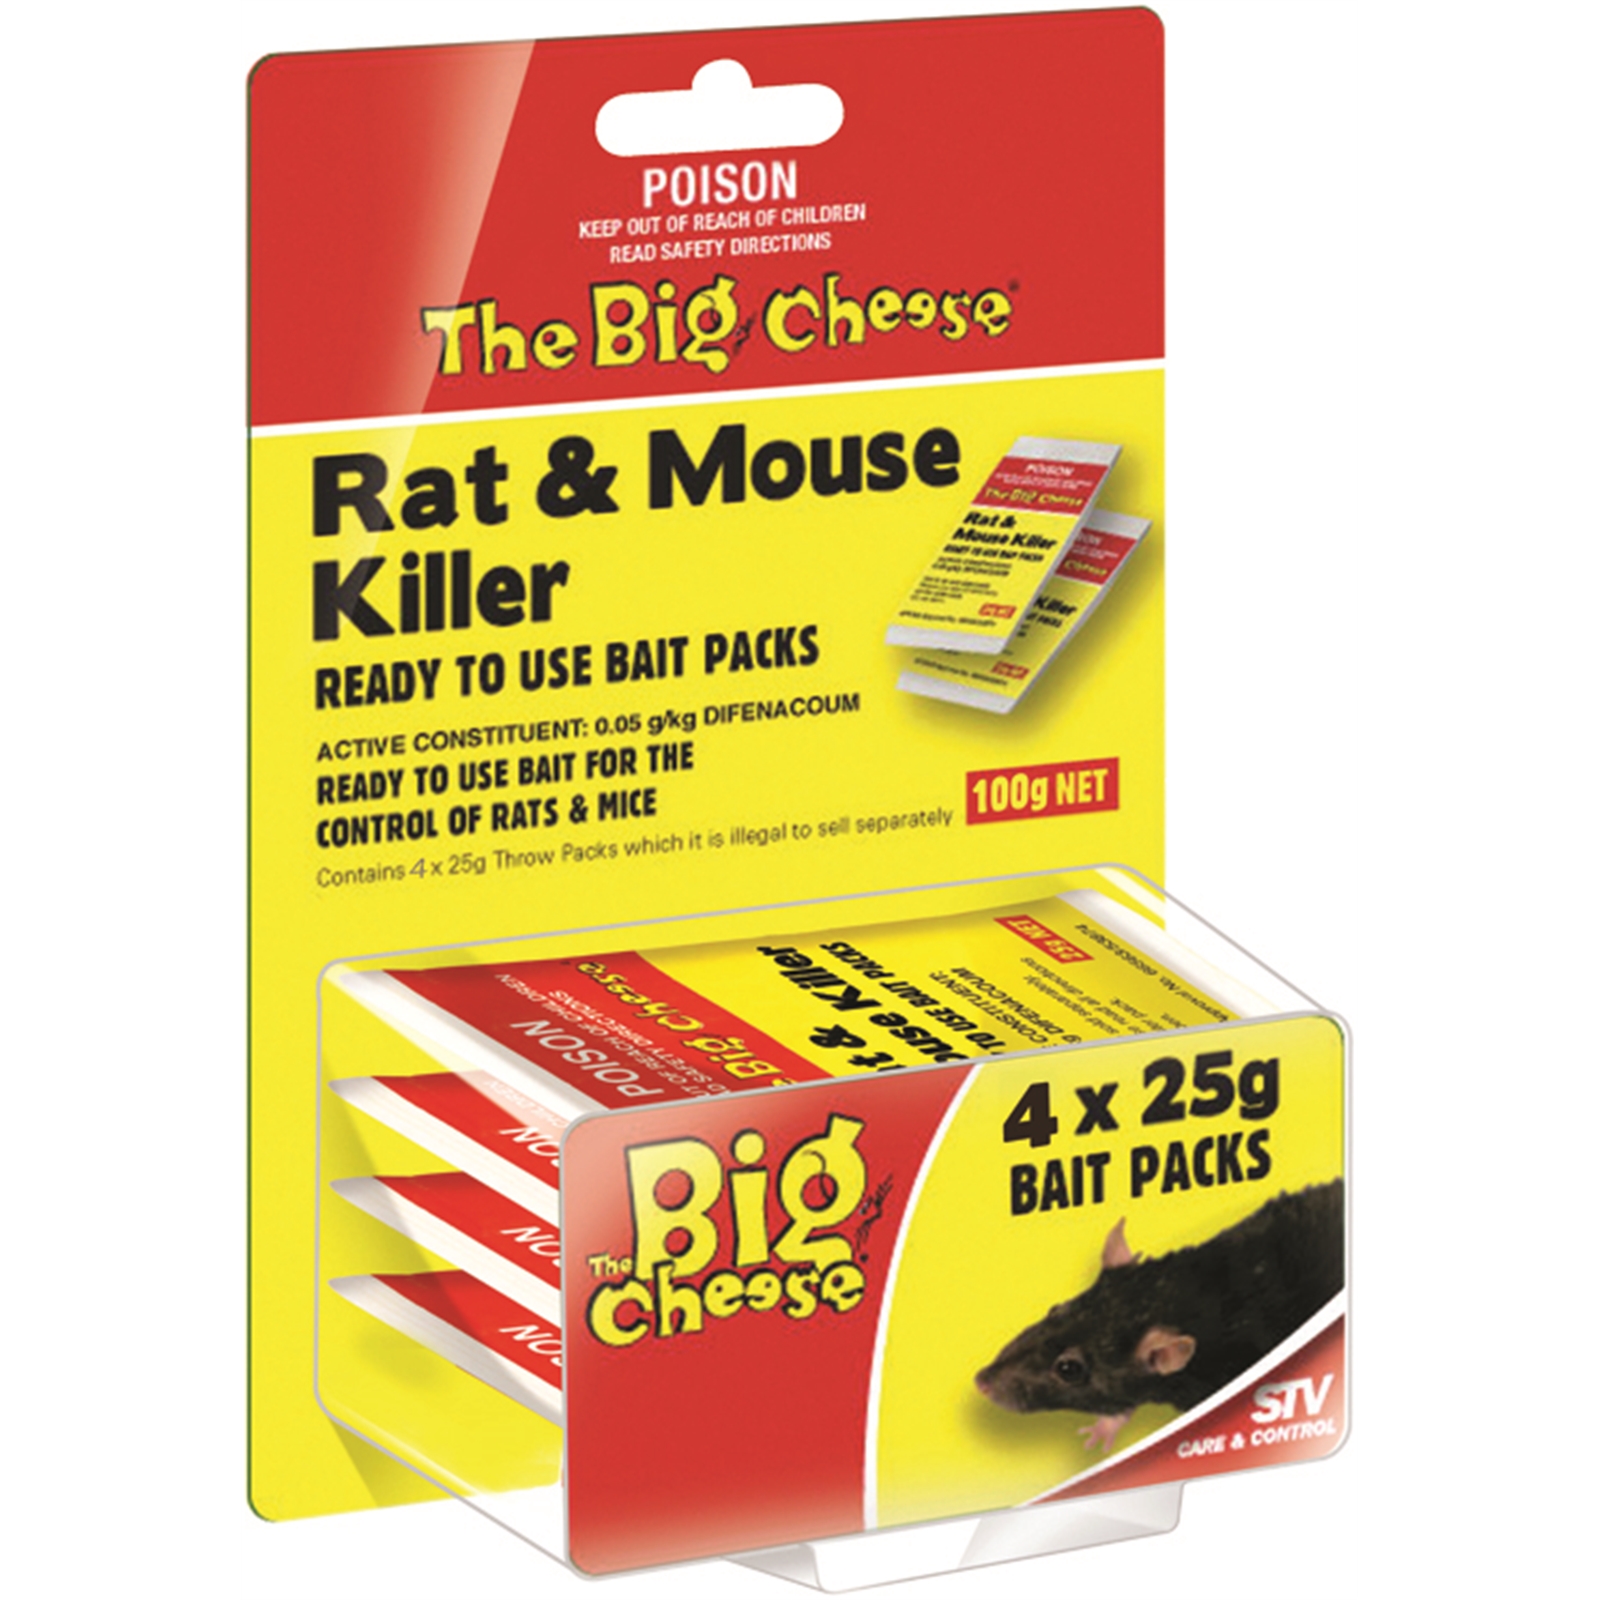 The Big Cheese 4 x 25g Mouse and Rat Kill Rodenticide Bait